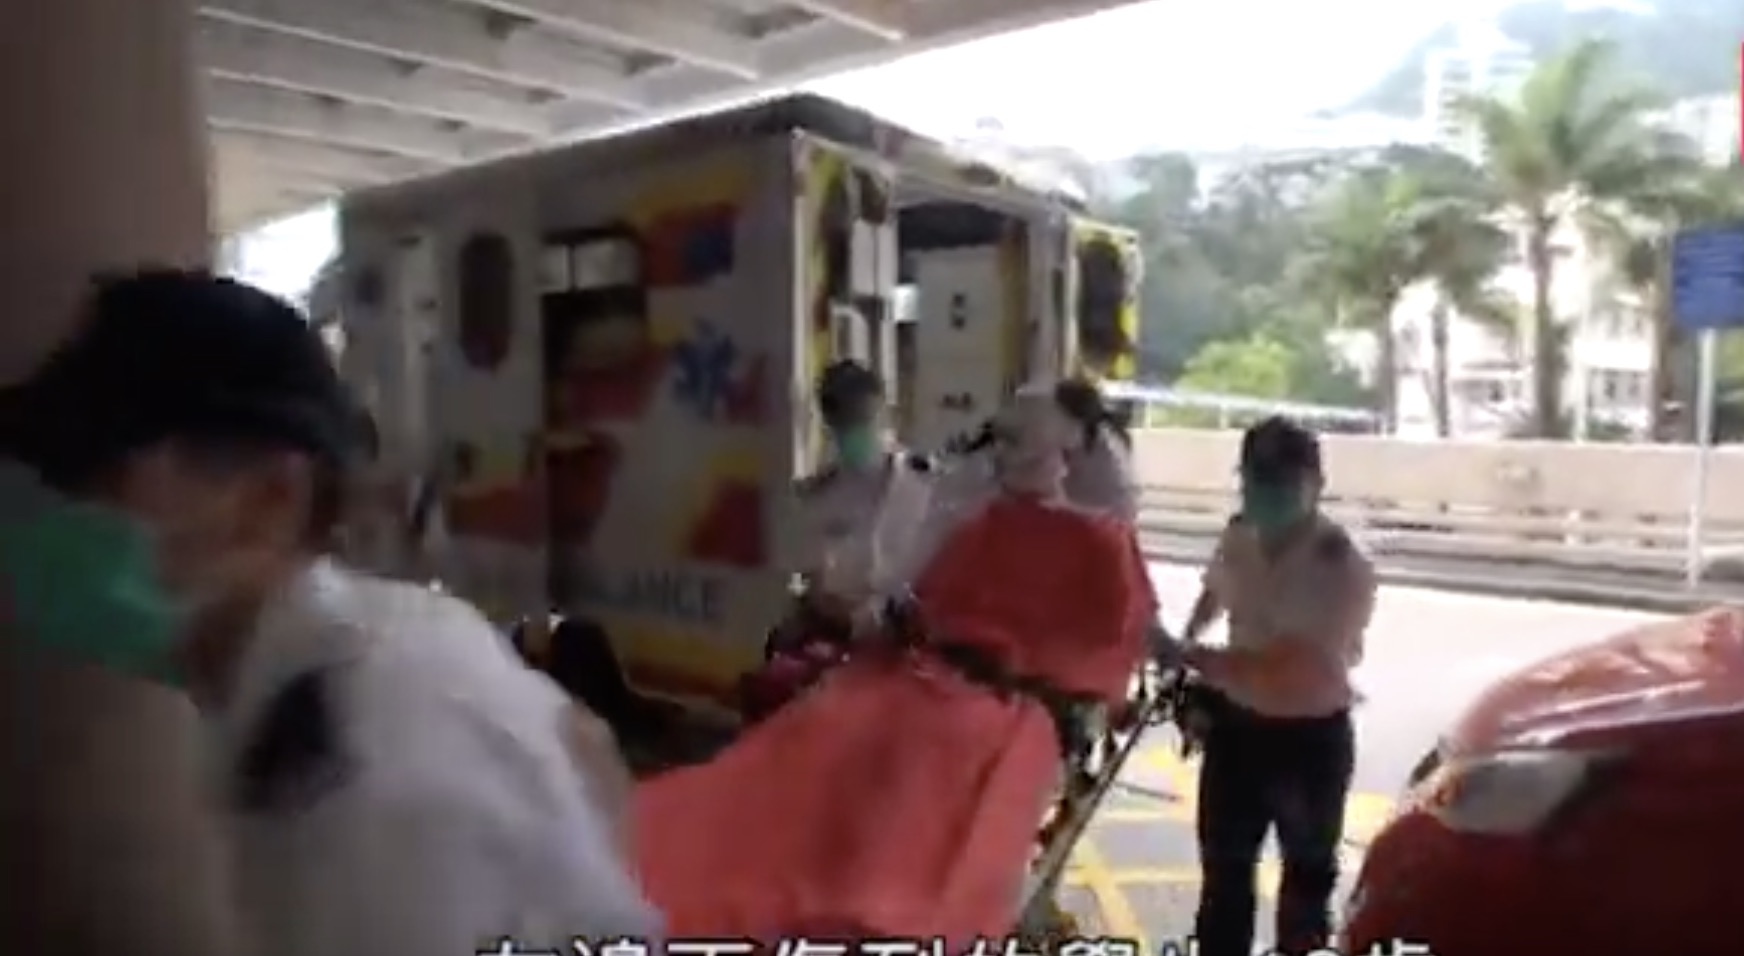 A 16-year-old student surnamed Choi was taken to hospital after his left cheek was gouged with a pen by another student. Screengrab via Apple Daily video.